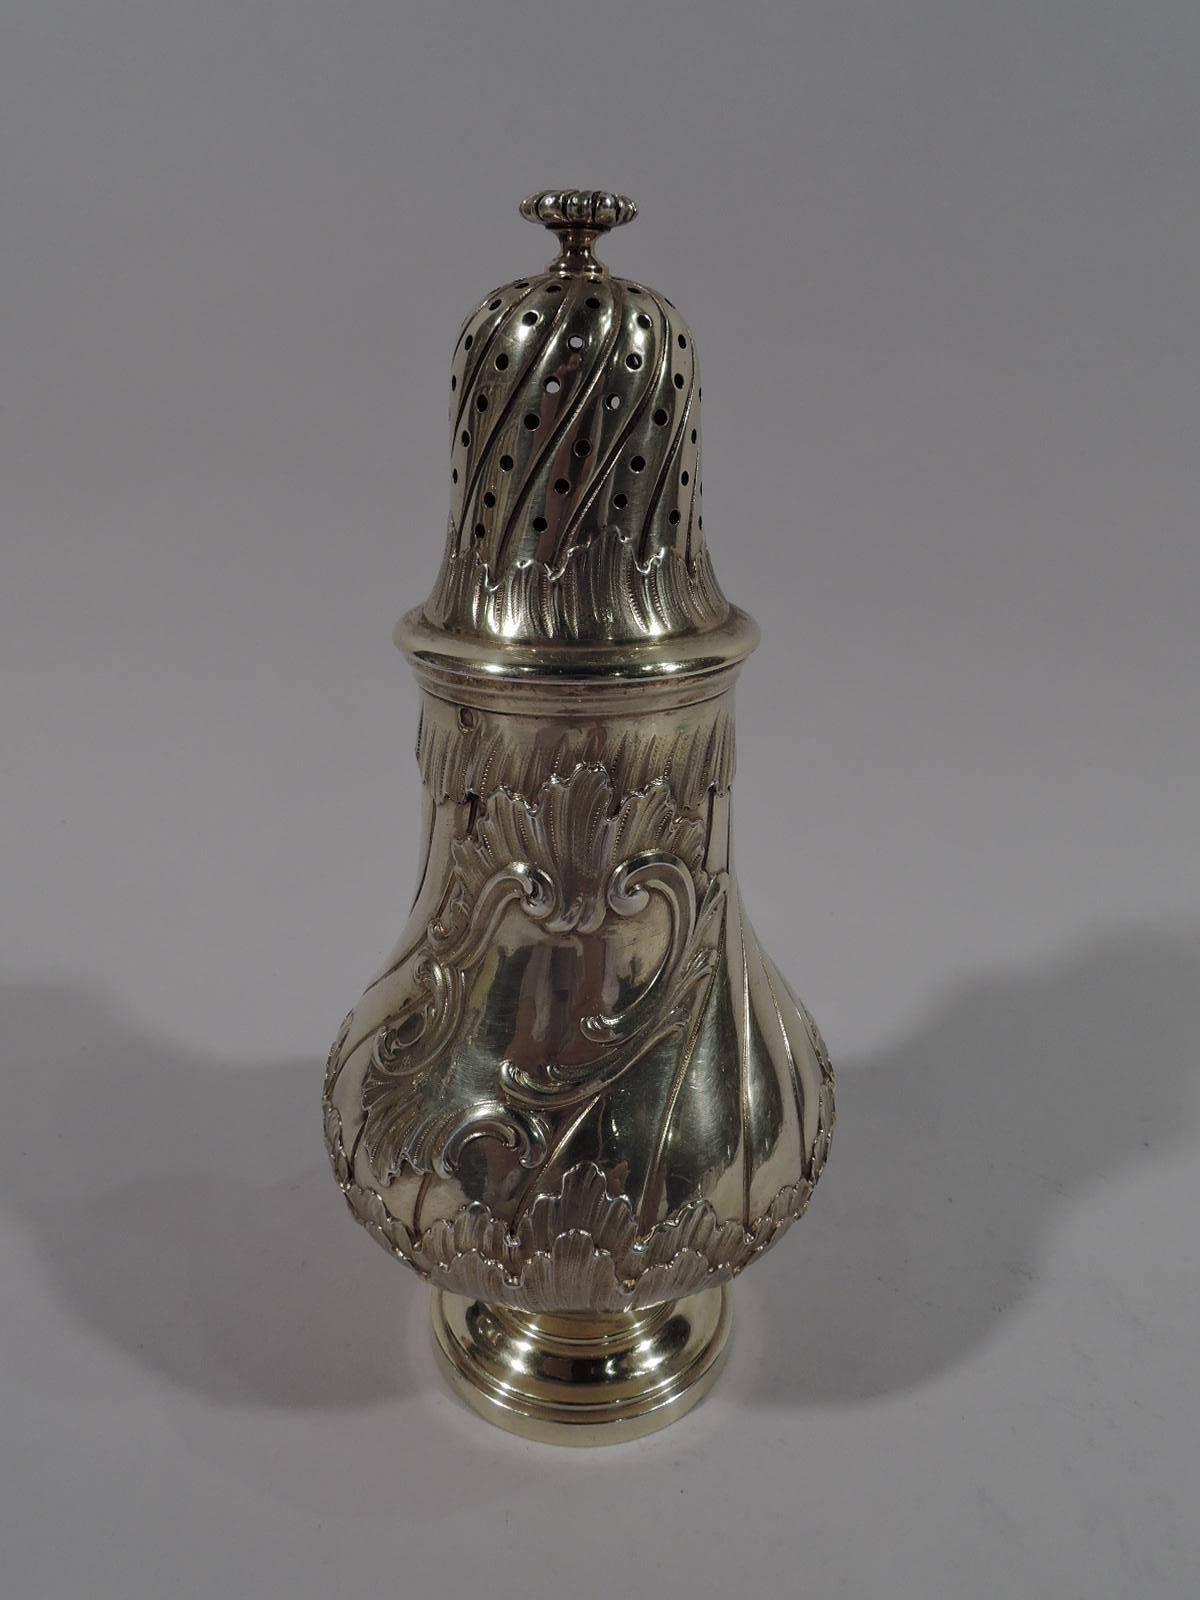 Pair of Belle Epoque gilt 950 silver sugar casters. Made by Odiot in Paris, circa 1880. Each, Baluster with stepped round foot and pierced domed cover. Twisted fluting and feathery, irregular, and overlapping acanthus leaf borders. Asymmetrical